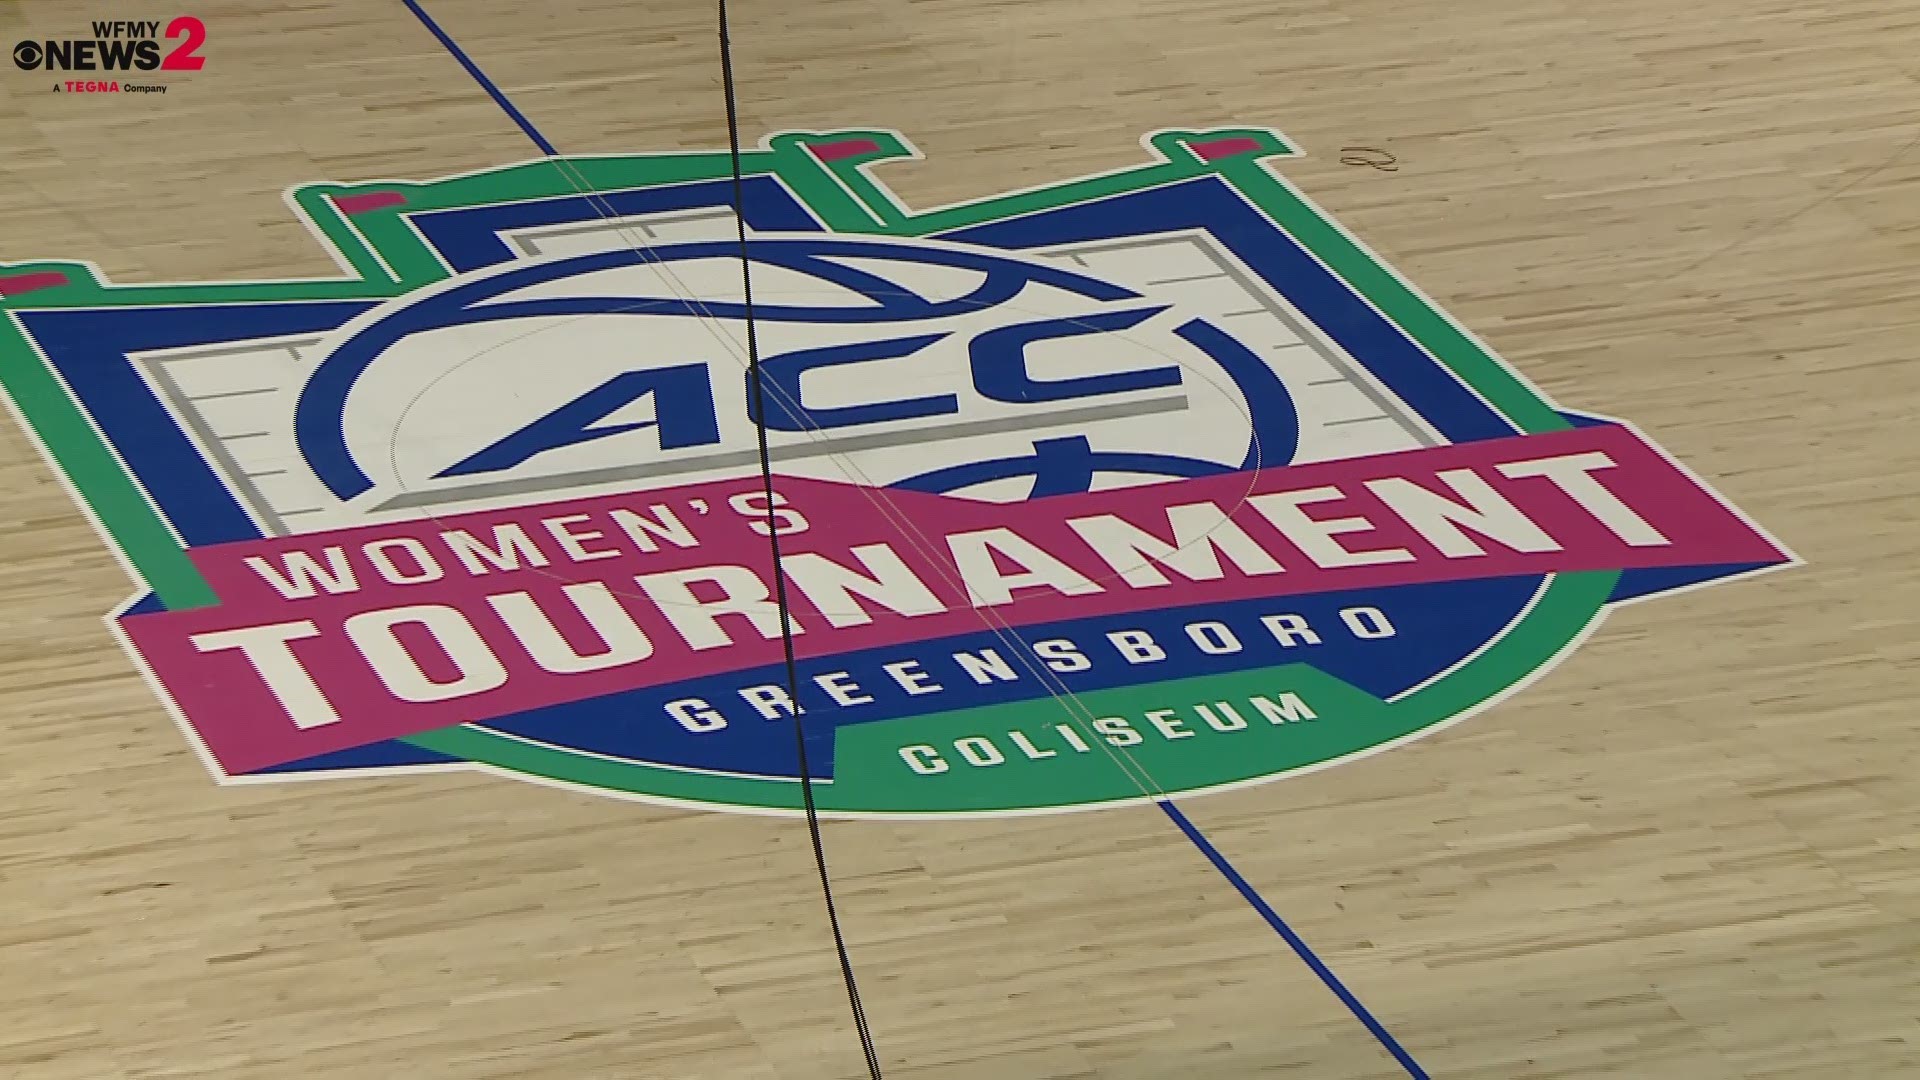 The tournament starts Wednesday, February 28 and runs through Sunday, March 4 at the Greensboro Coliseum Complex. #ACCWBB